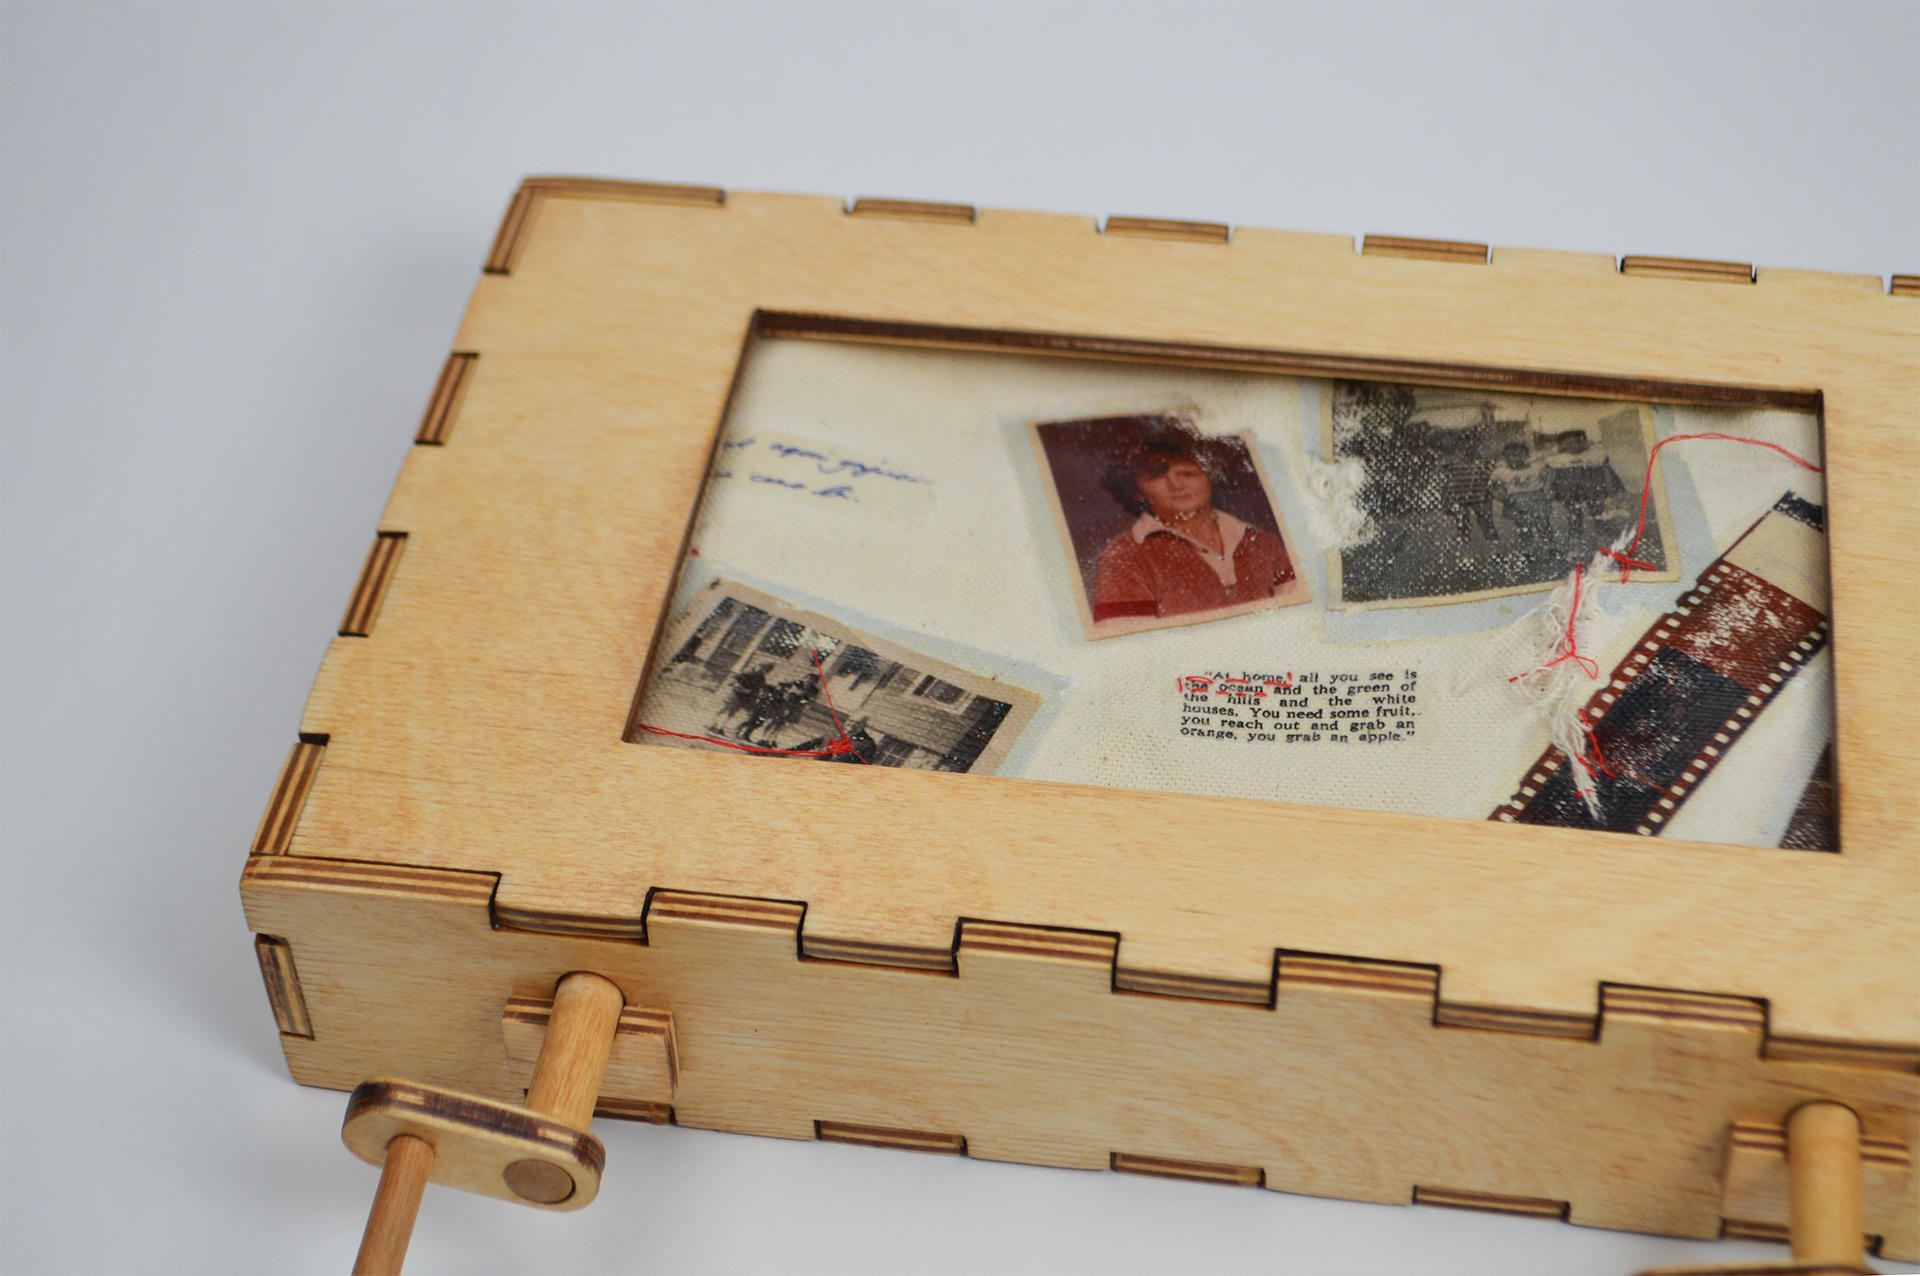 Birch plywood box containing family documents